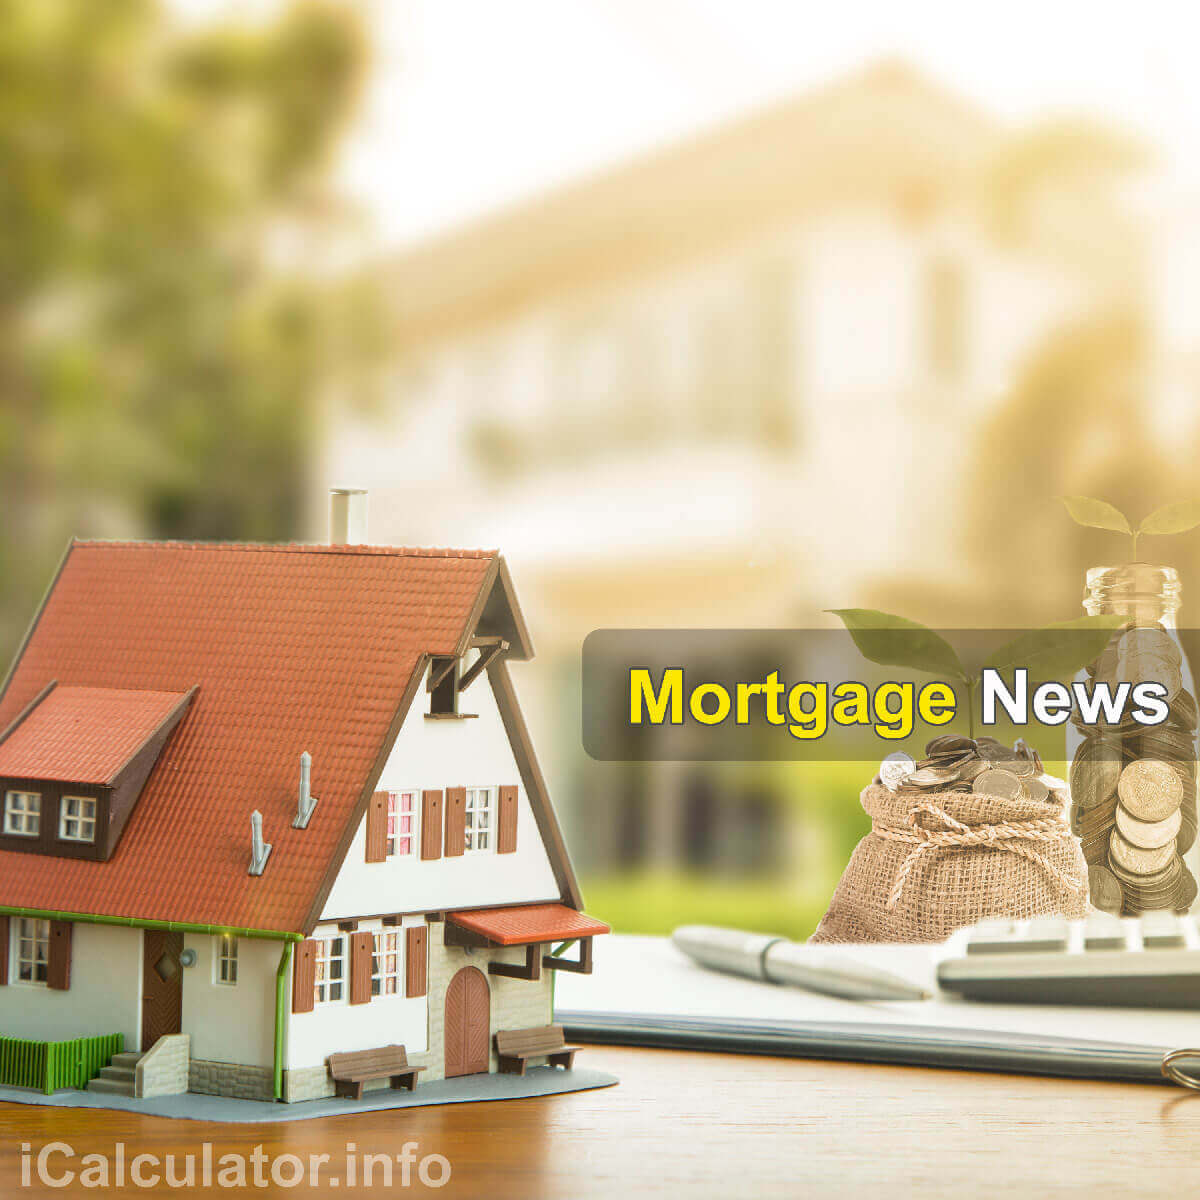 Buy-to-let Mortgages. This image shows information relating to mortagegs and mortgage interest rate calculations using the mortgage calculator